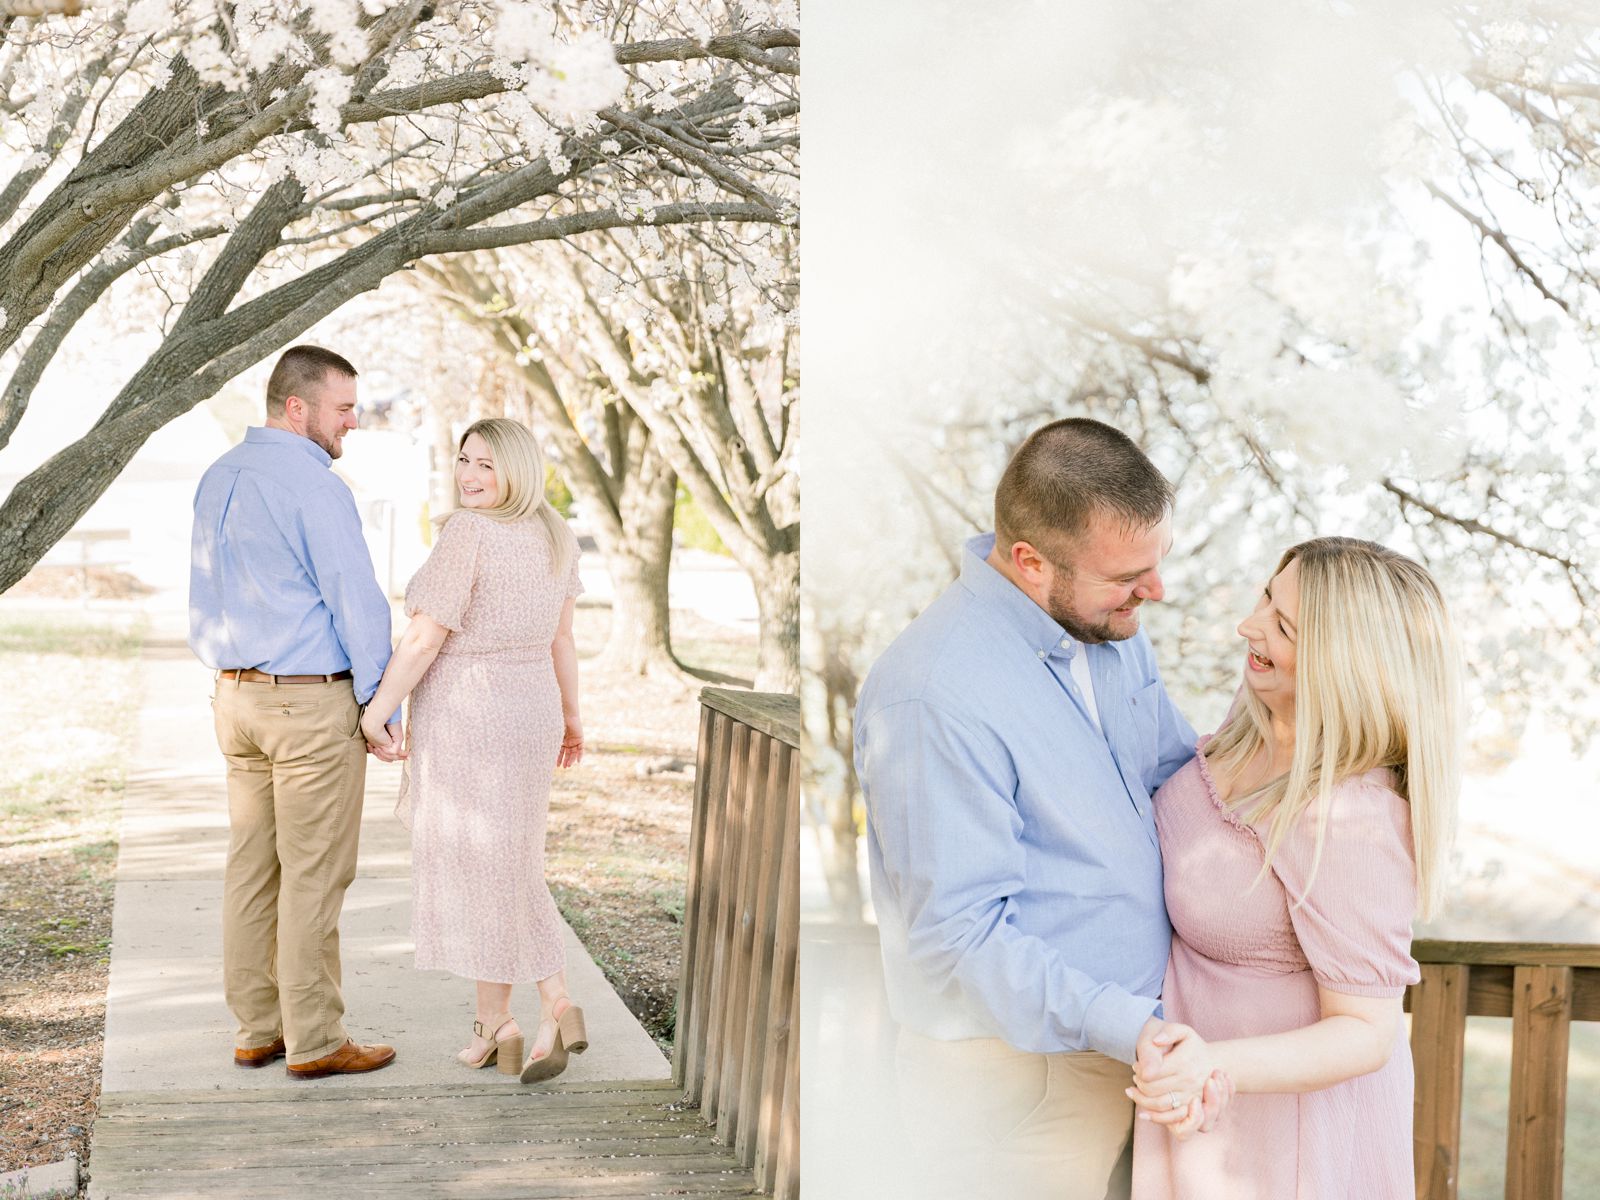 Spring_wedding_engagement_photos_locations_st_james_rolla_jeff_columbia_videography_outfits_blossoms_trees_flowers_best_top_reputable_